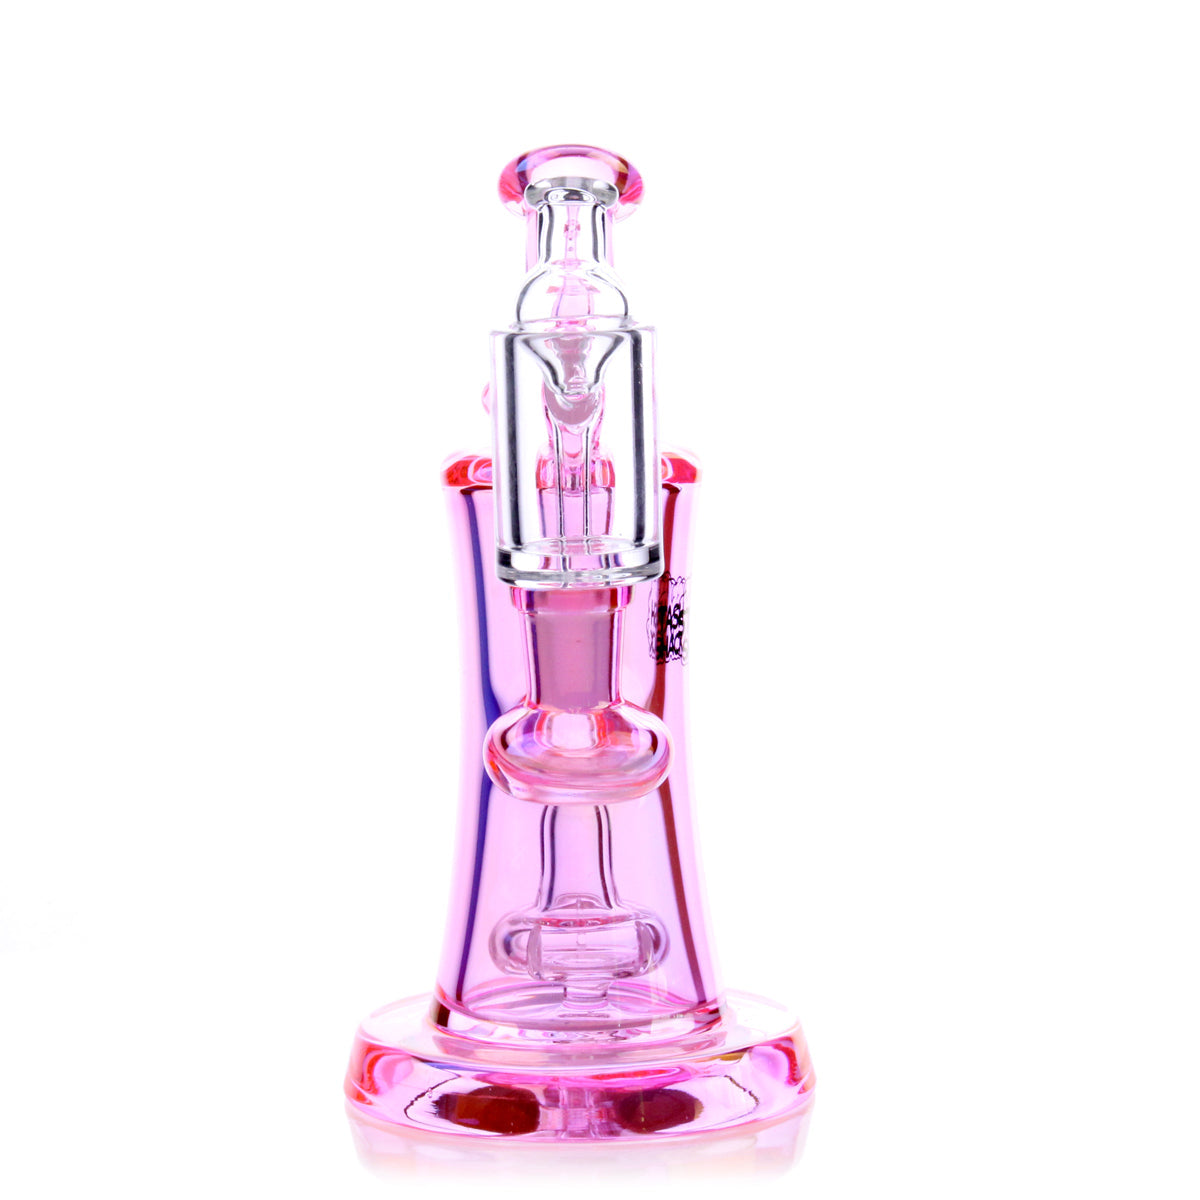 Elysian Mini Rig in pink borosilicate glass, portable 5.5" dab rig with banger hanger, front view